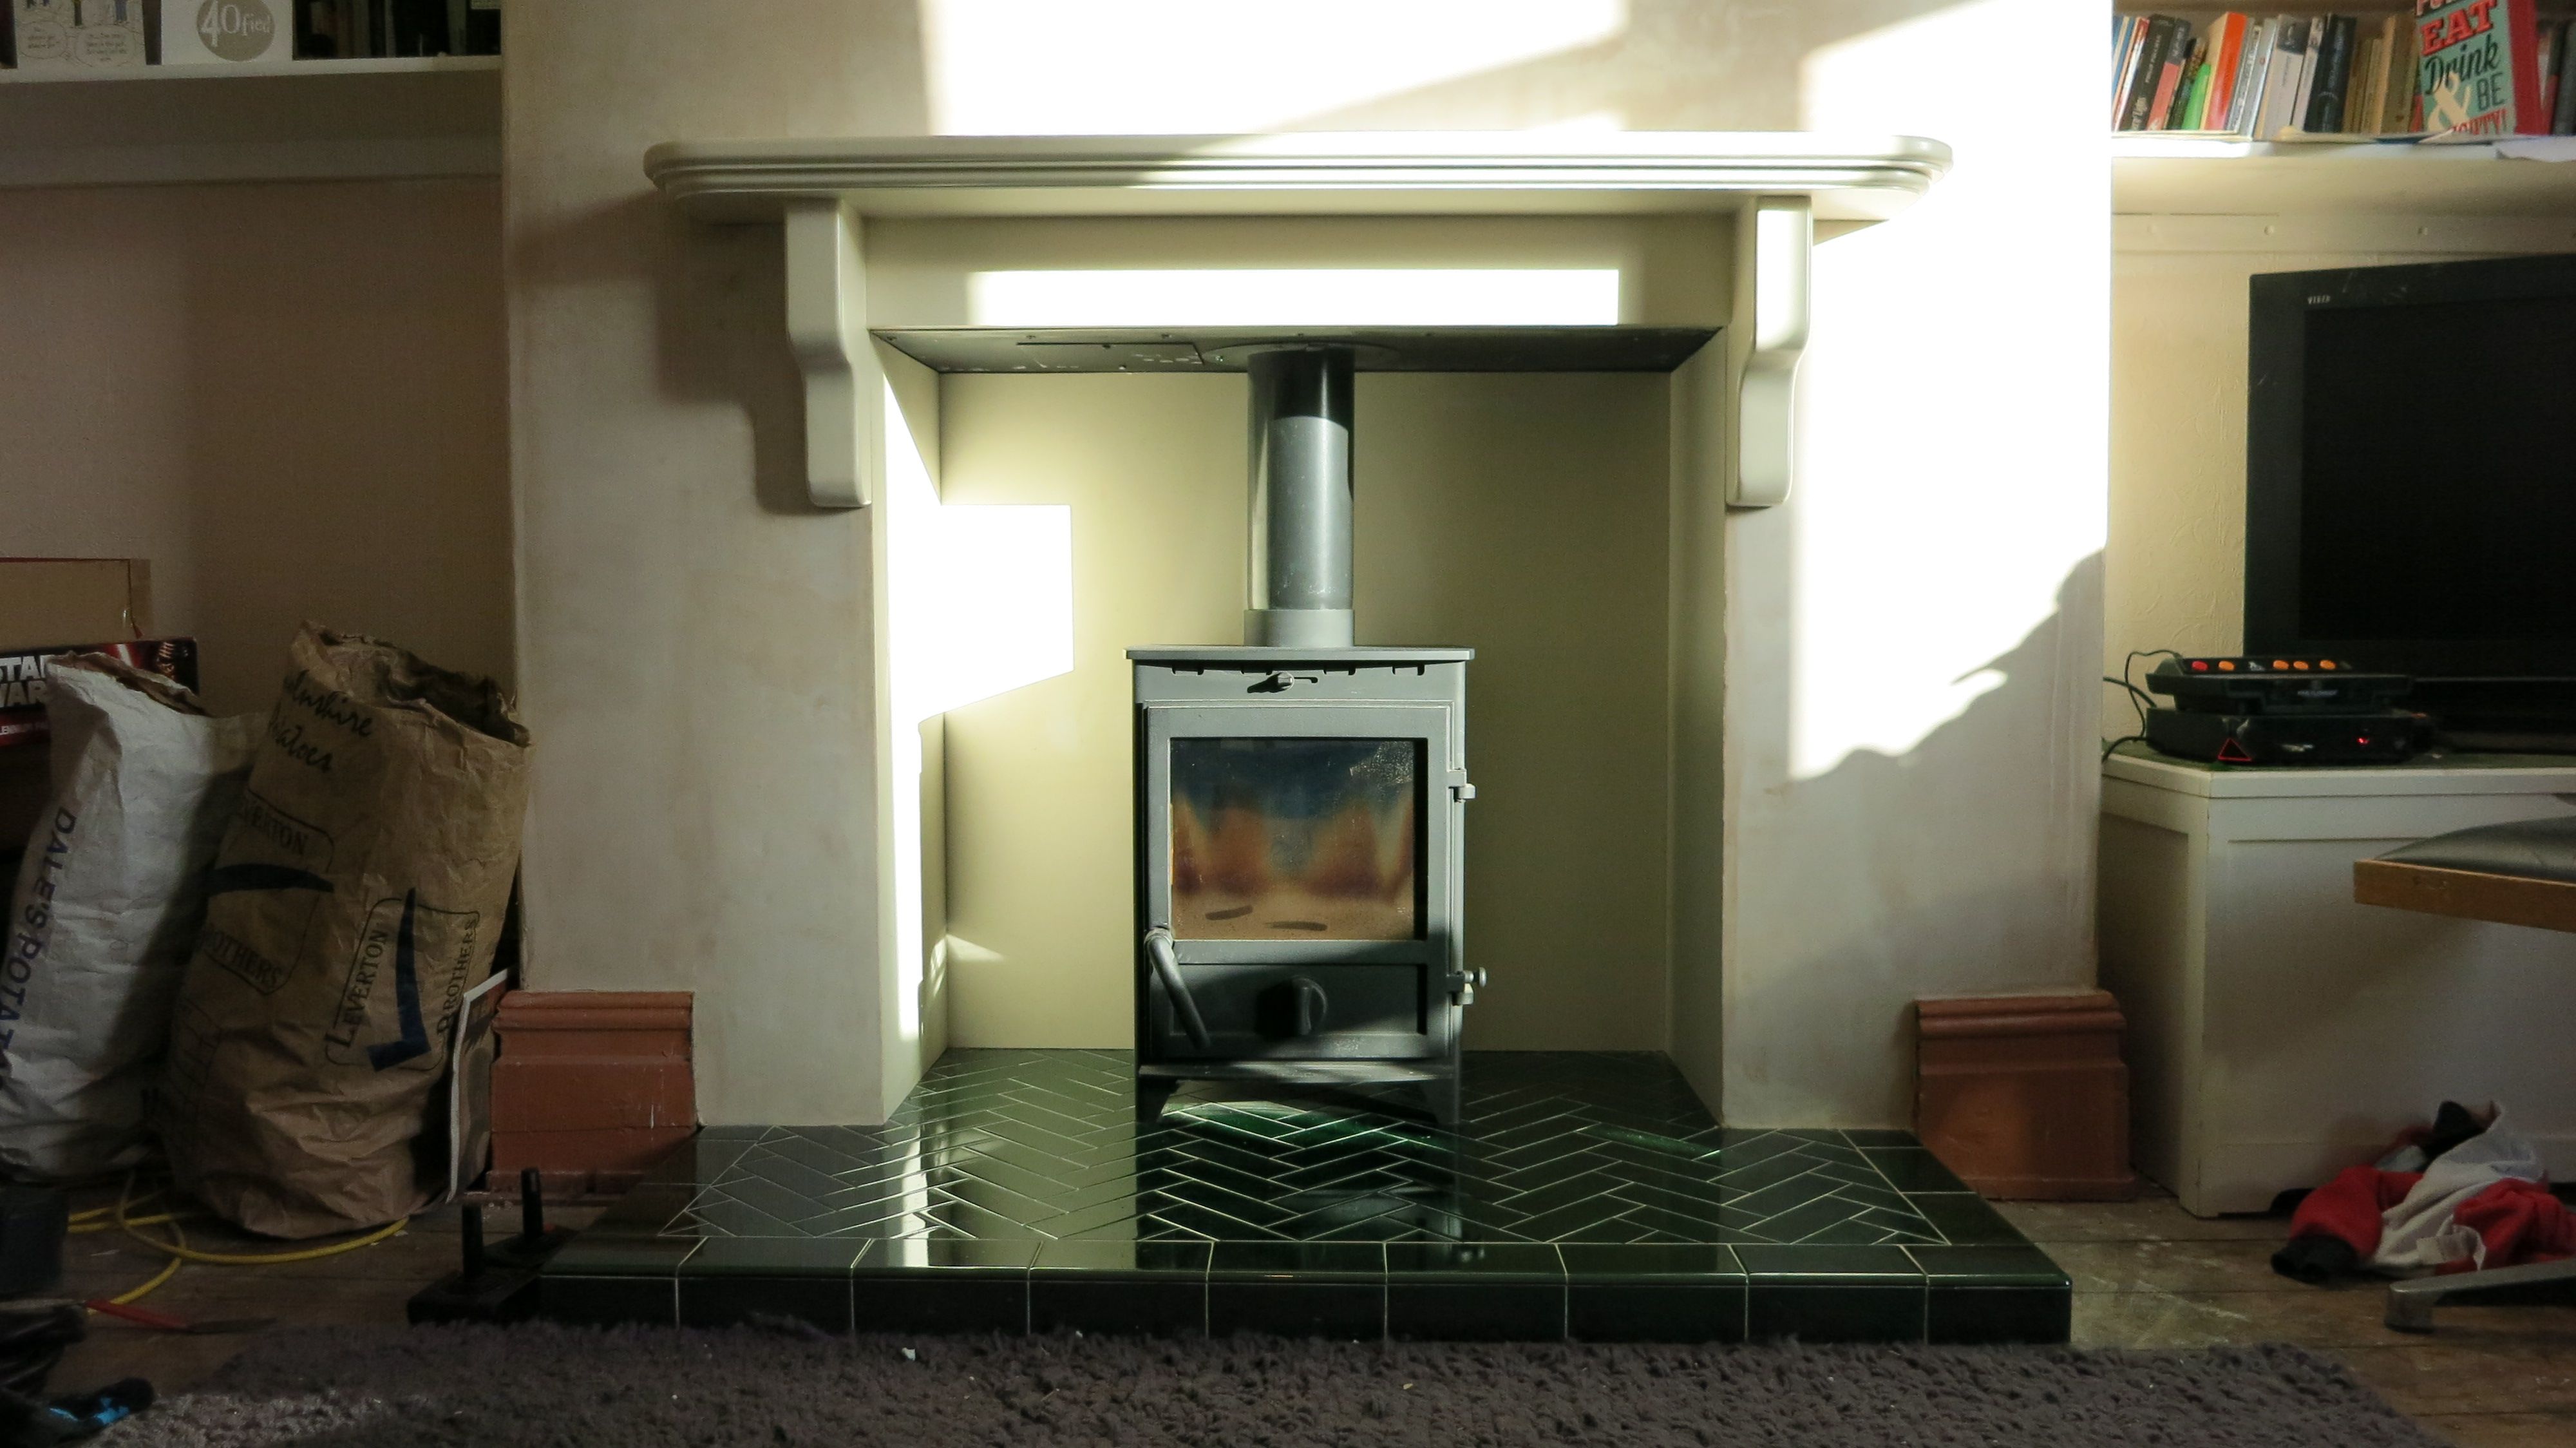 Green Fireplace Tile Awesome A Fireline Fp5 Multi Fuel Stove On A Green Herringbone Tiled